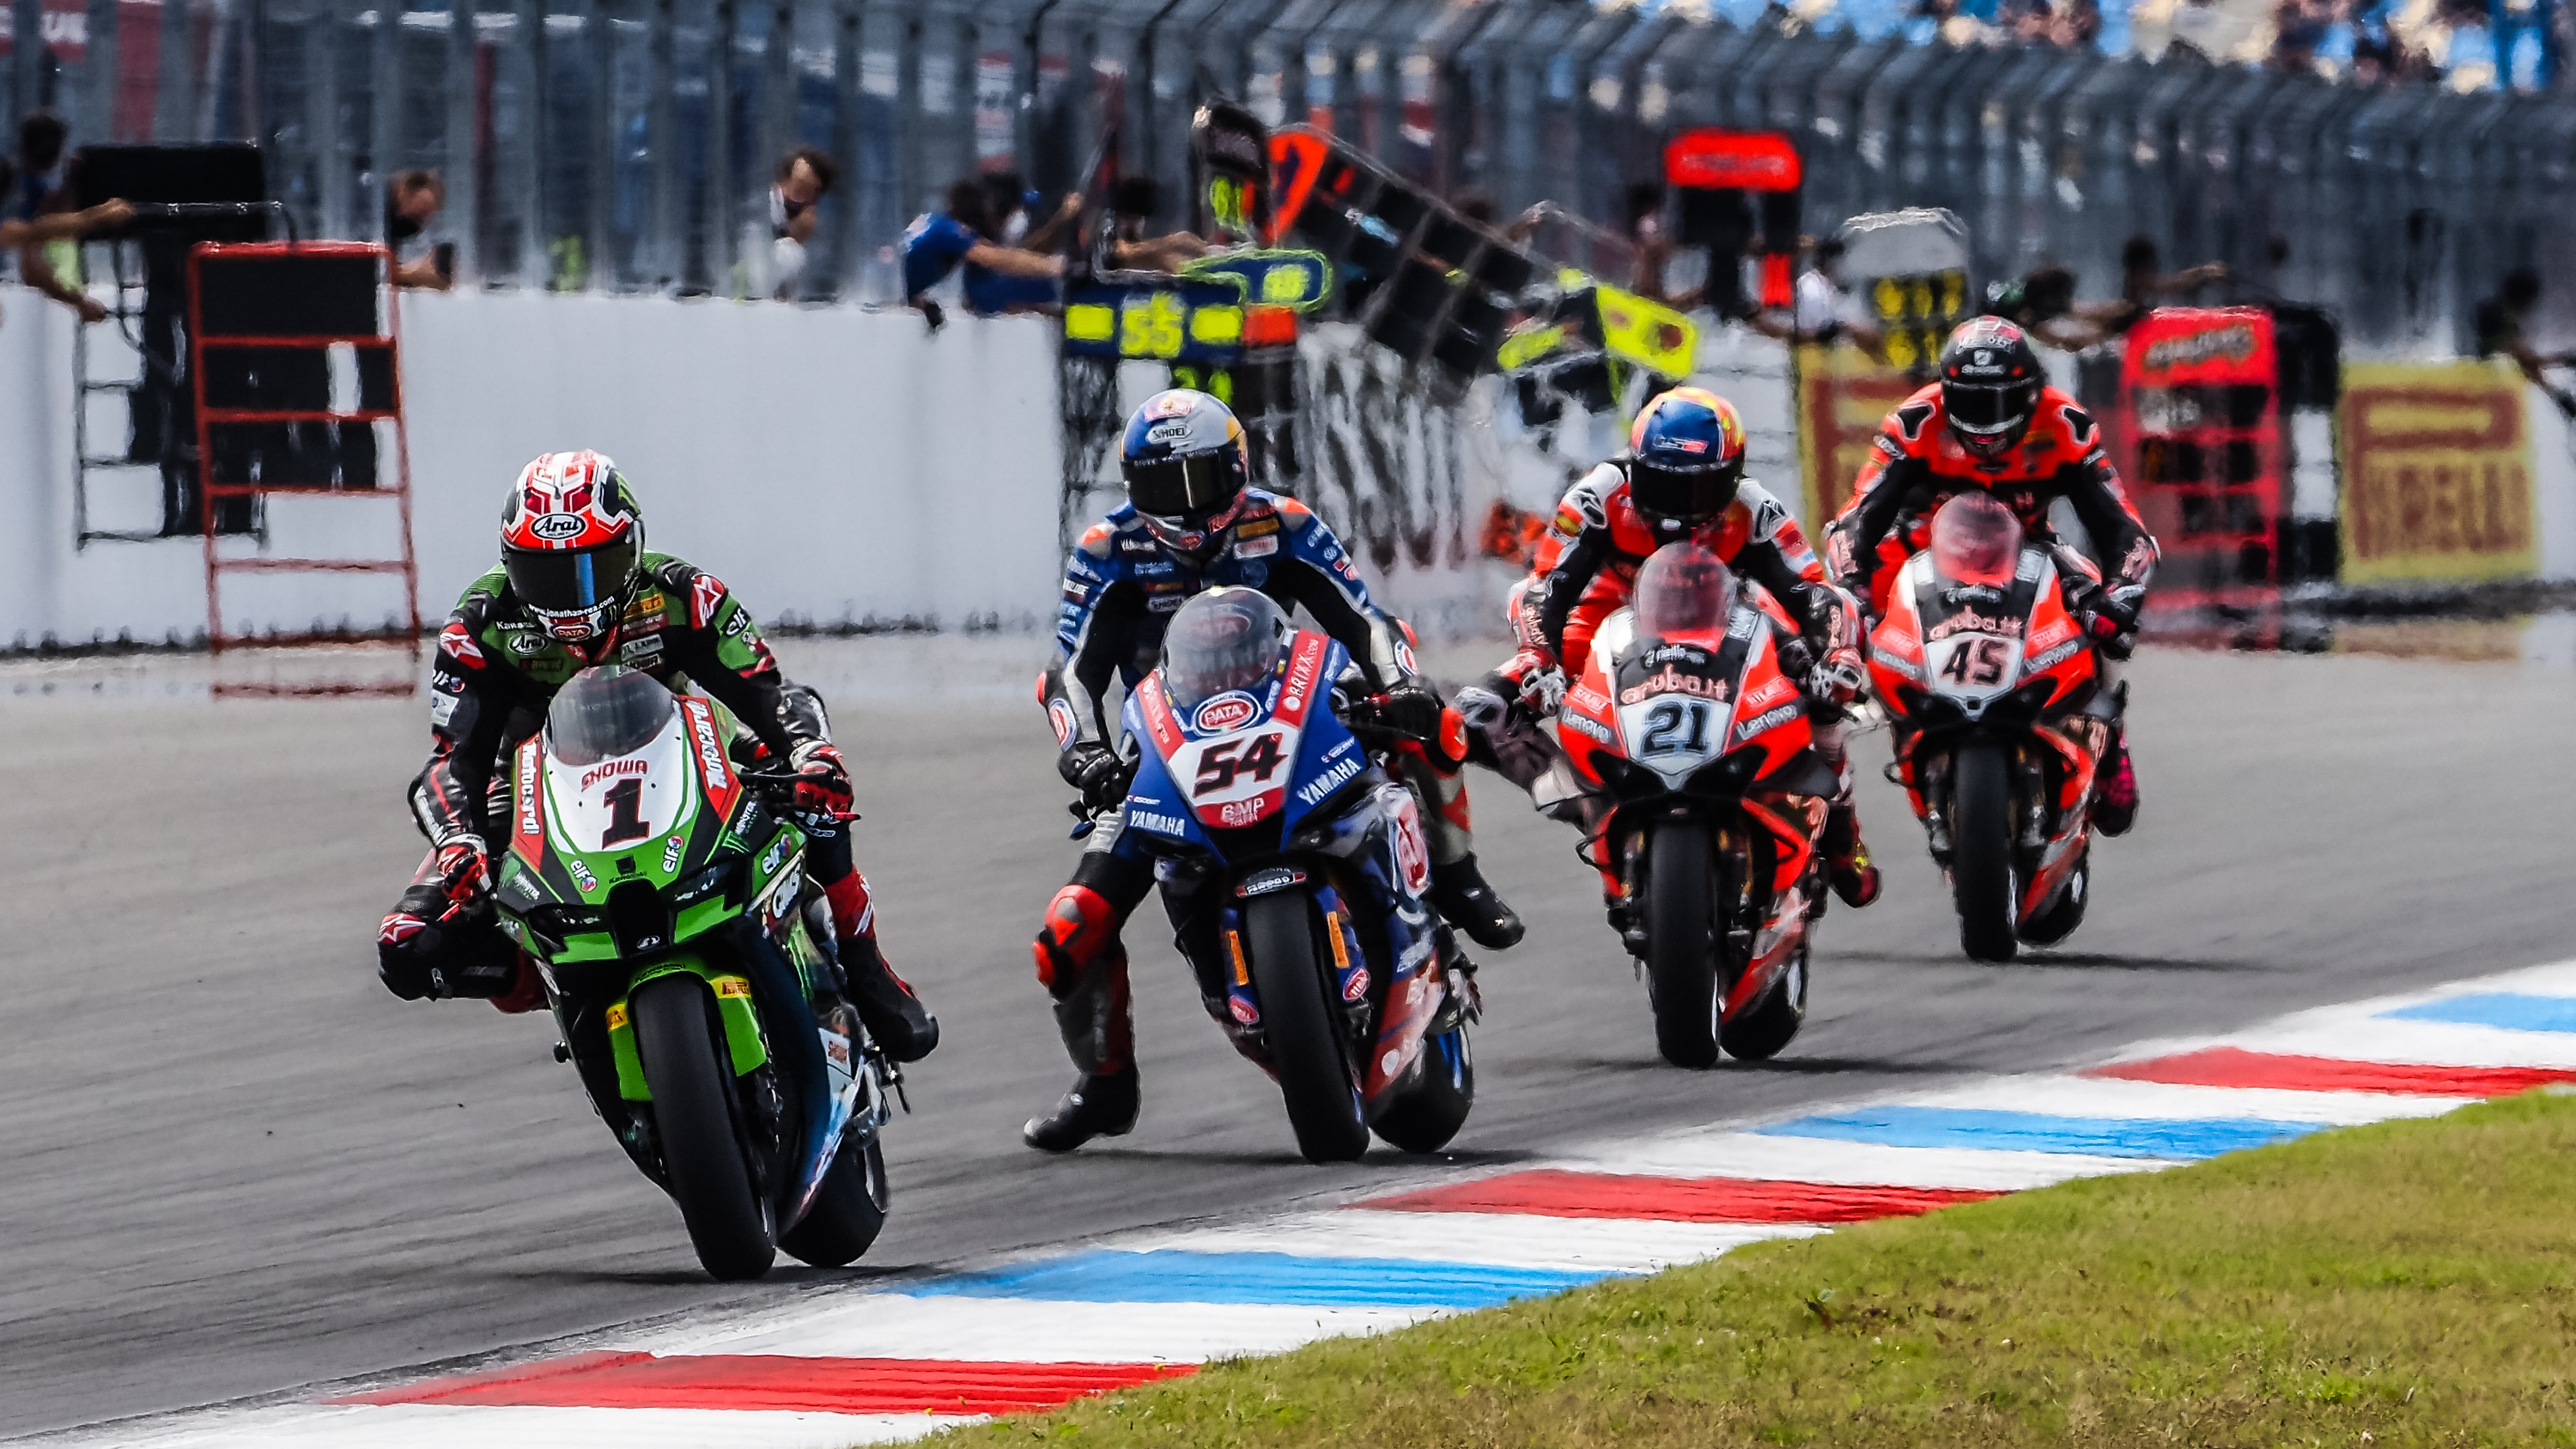 WorldSBK remains with the Foxtel Group in Australia